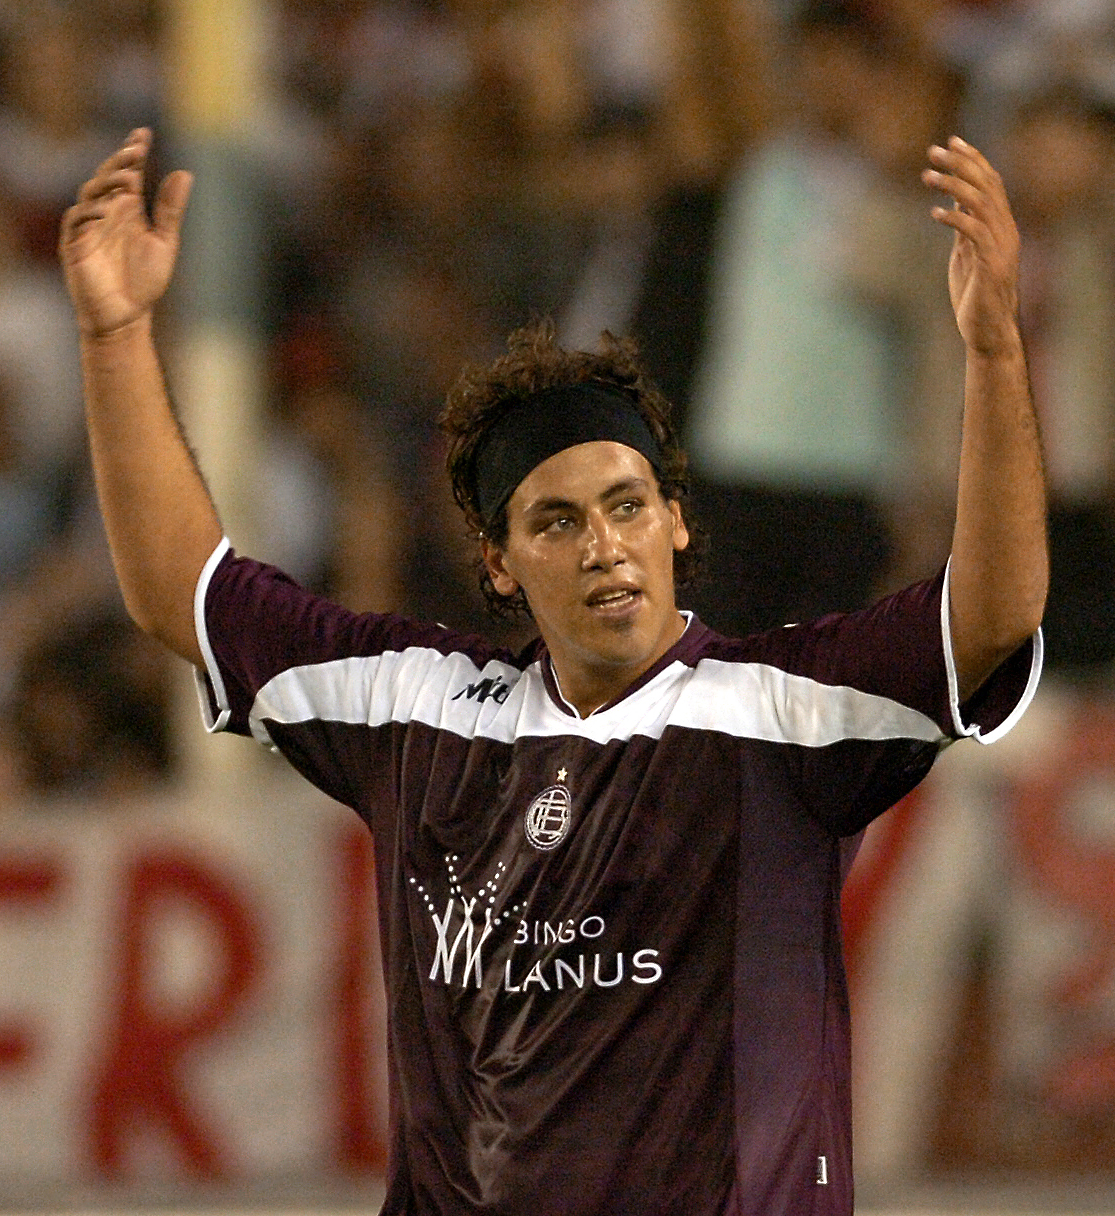 Lanus' Cristian Fabbiani celebrates his goal against River Plate, 02 April 2006, during the Clausura tournament match at Lanus stadium in Buenos Aires, Argentina. Lanus 4-1.,Image: 18098876, License: Rights-managed, Restrictions: , Model Release: no